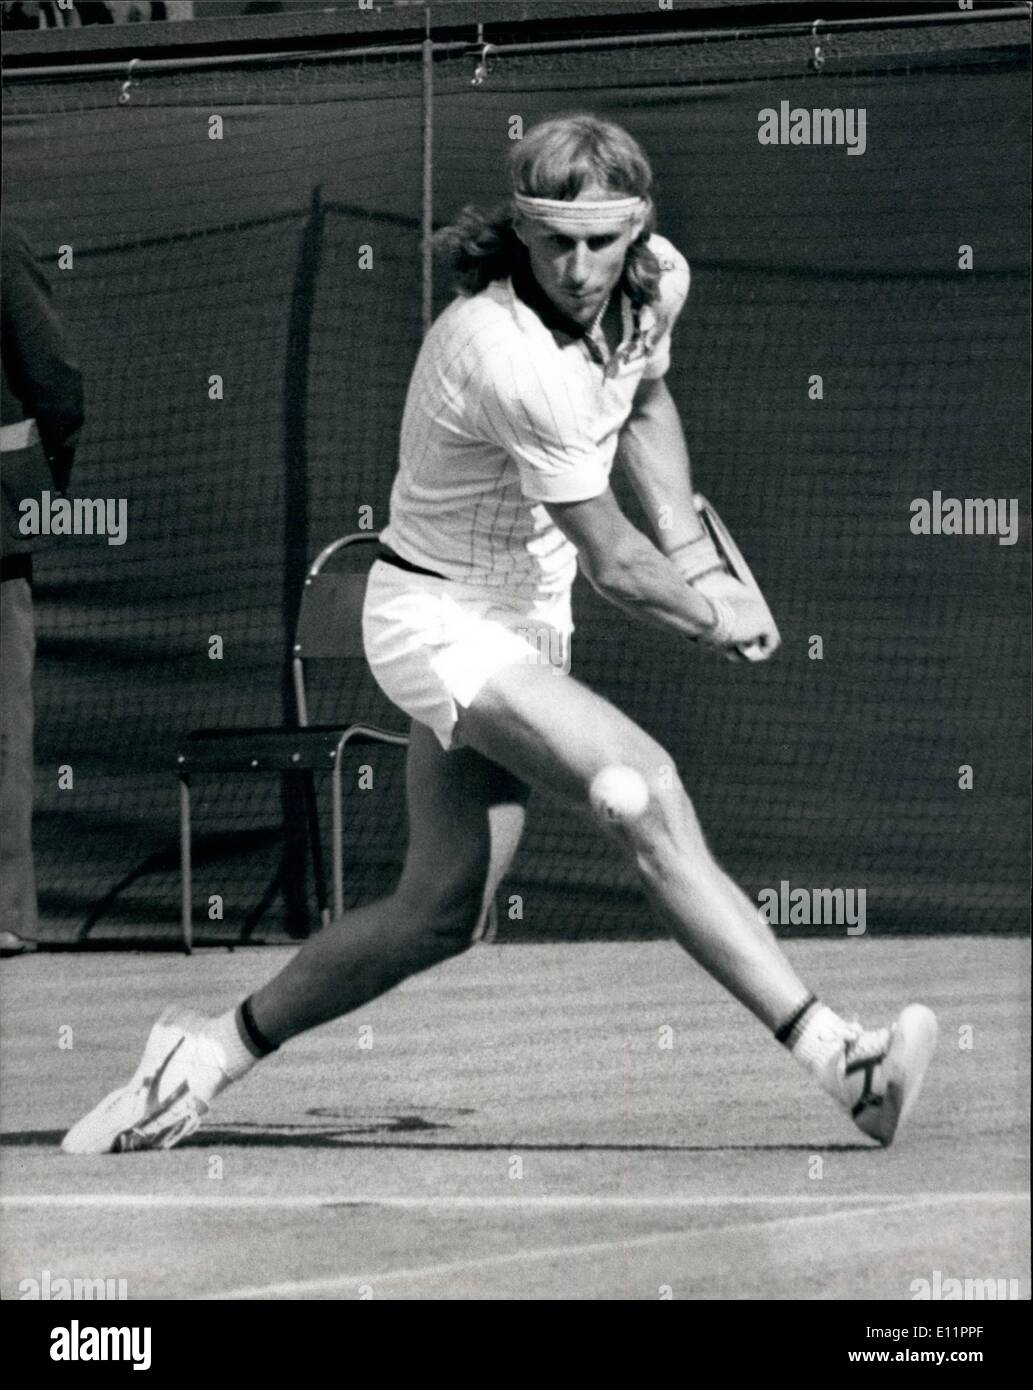 Jun. 06, 1979 - Wimbledon Tennis Championships Bjorn Borg V Tom Gorman: Photo shows Bjorn Borg seen in action against T.Gorman USA on the opening match on the Centre Court. Stock Photo